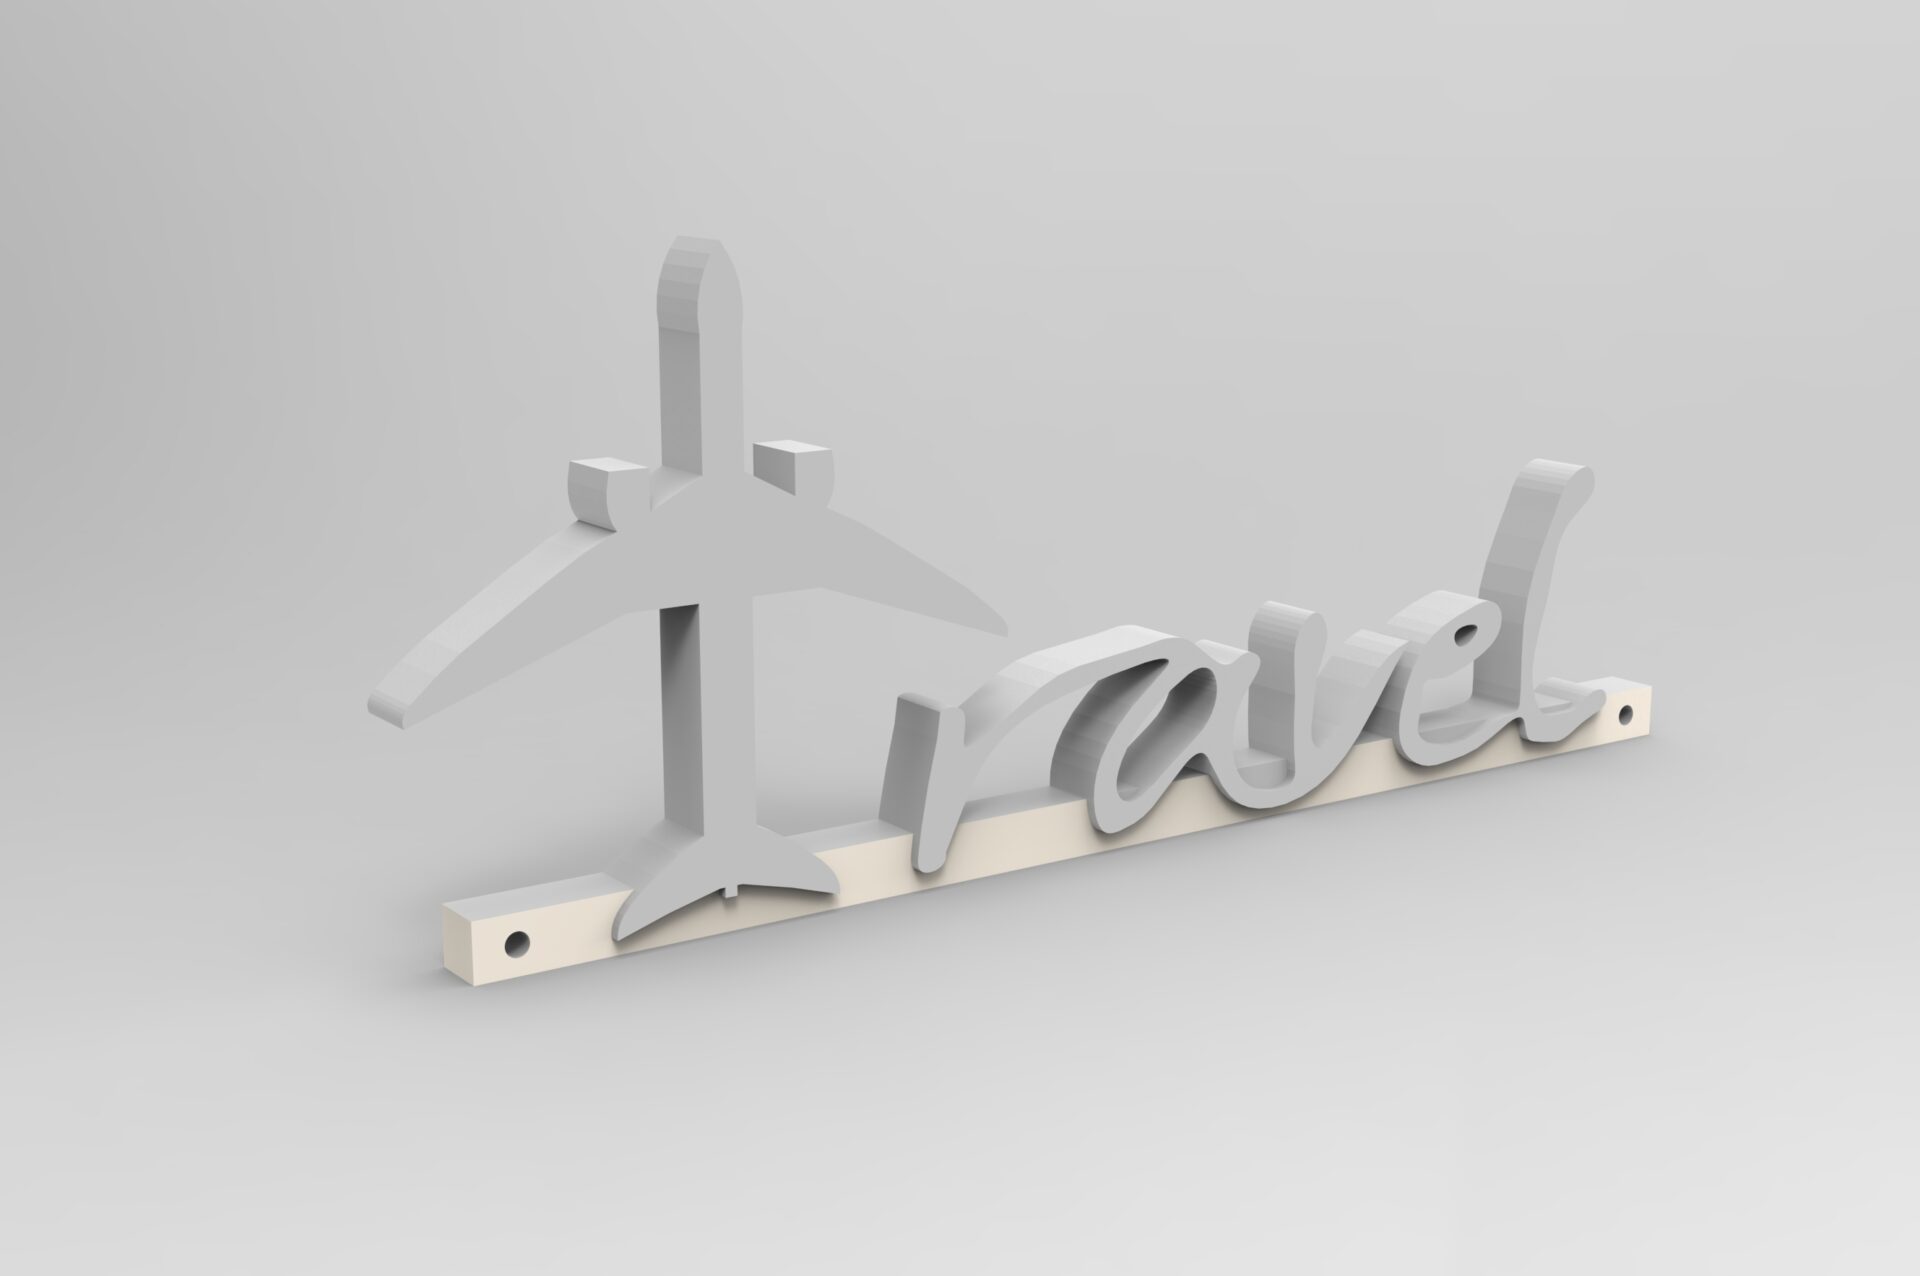 the-door-ornament-that-says-travel